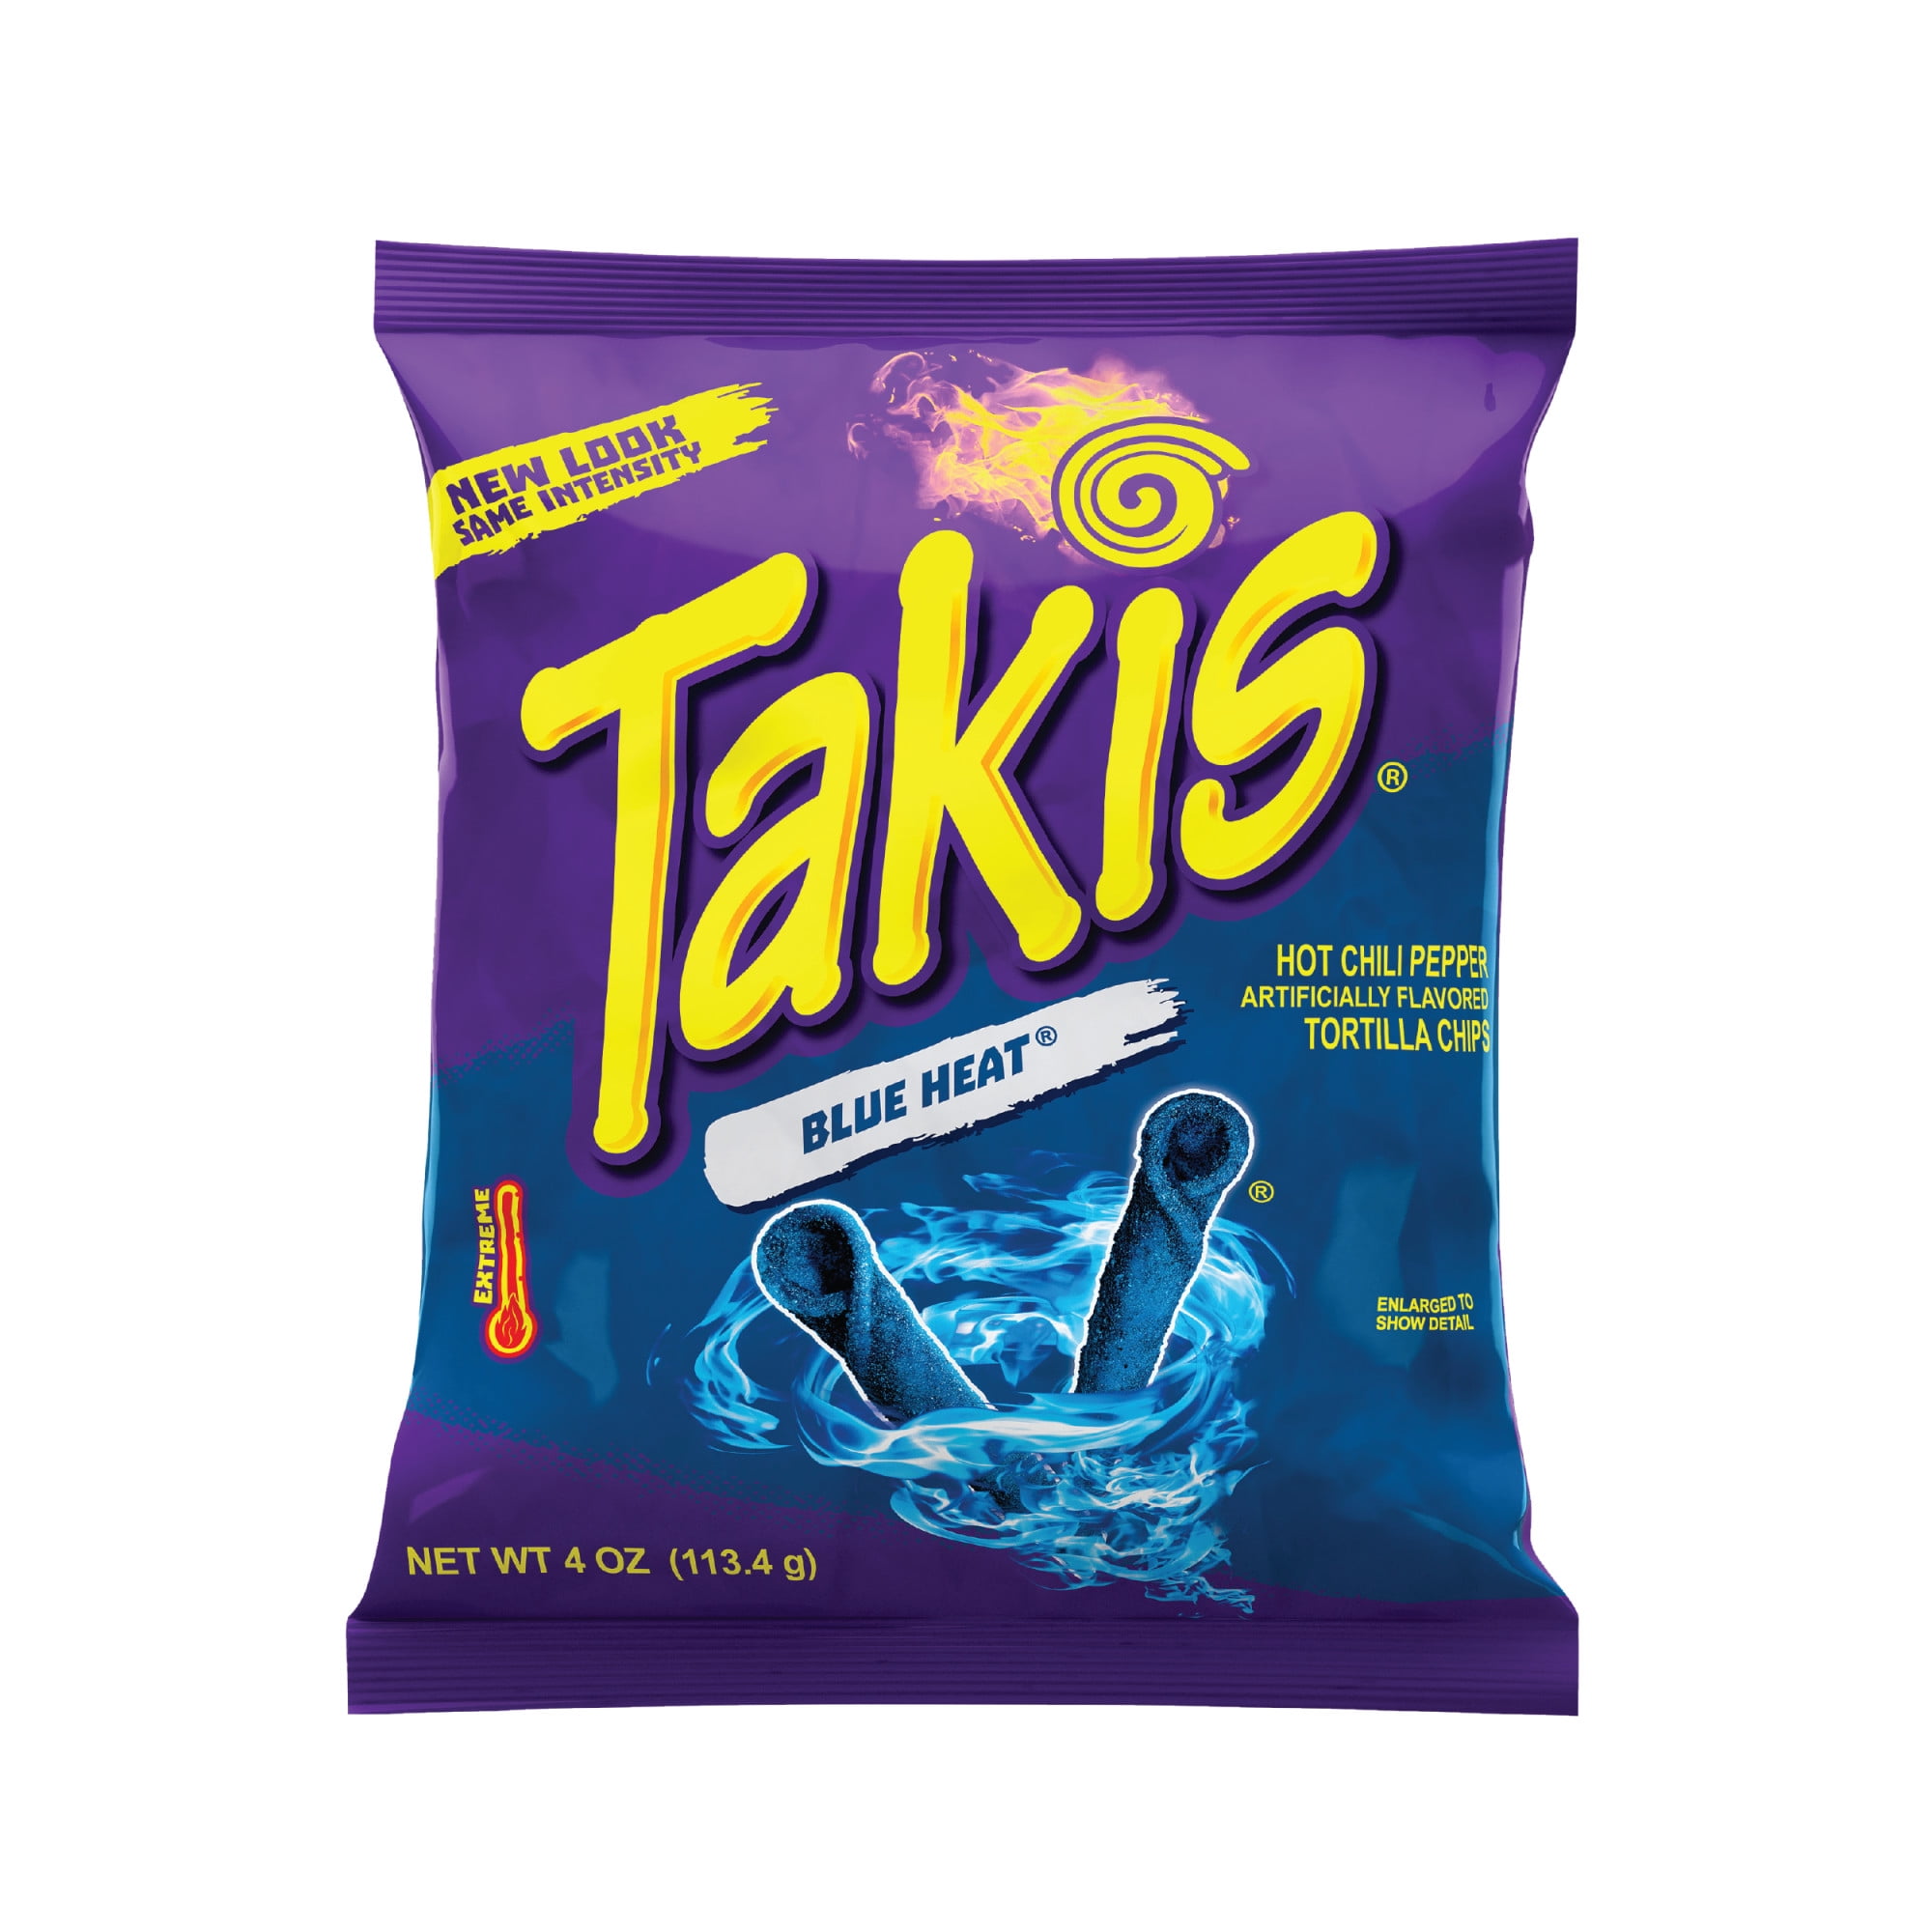 Takis Blue Heat Rolls 4 oz Bag,  Hot Chili Pepper Flavored Spicy Tortilla Chips